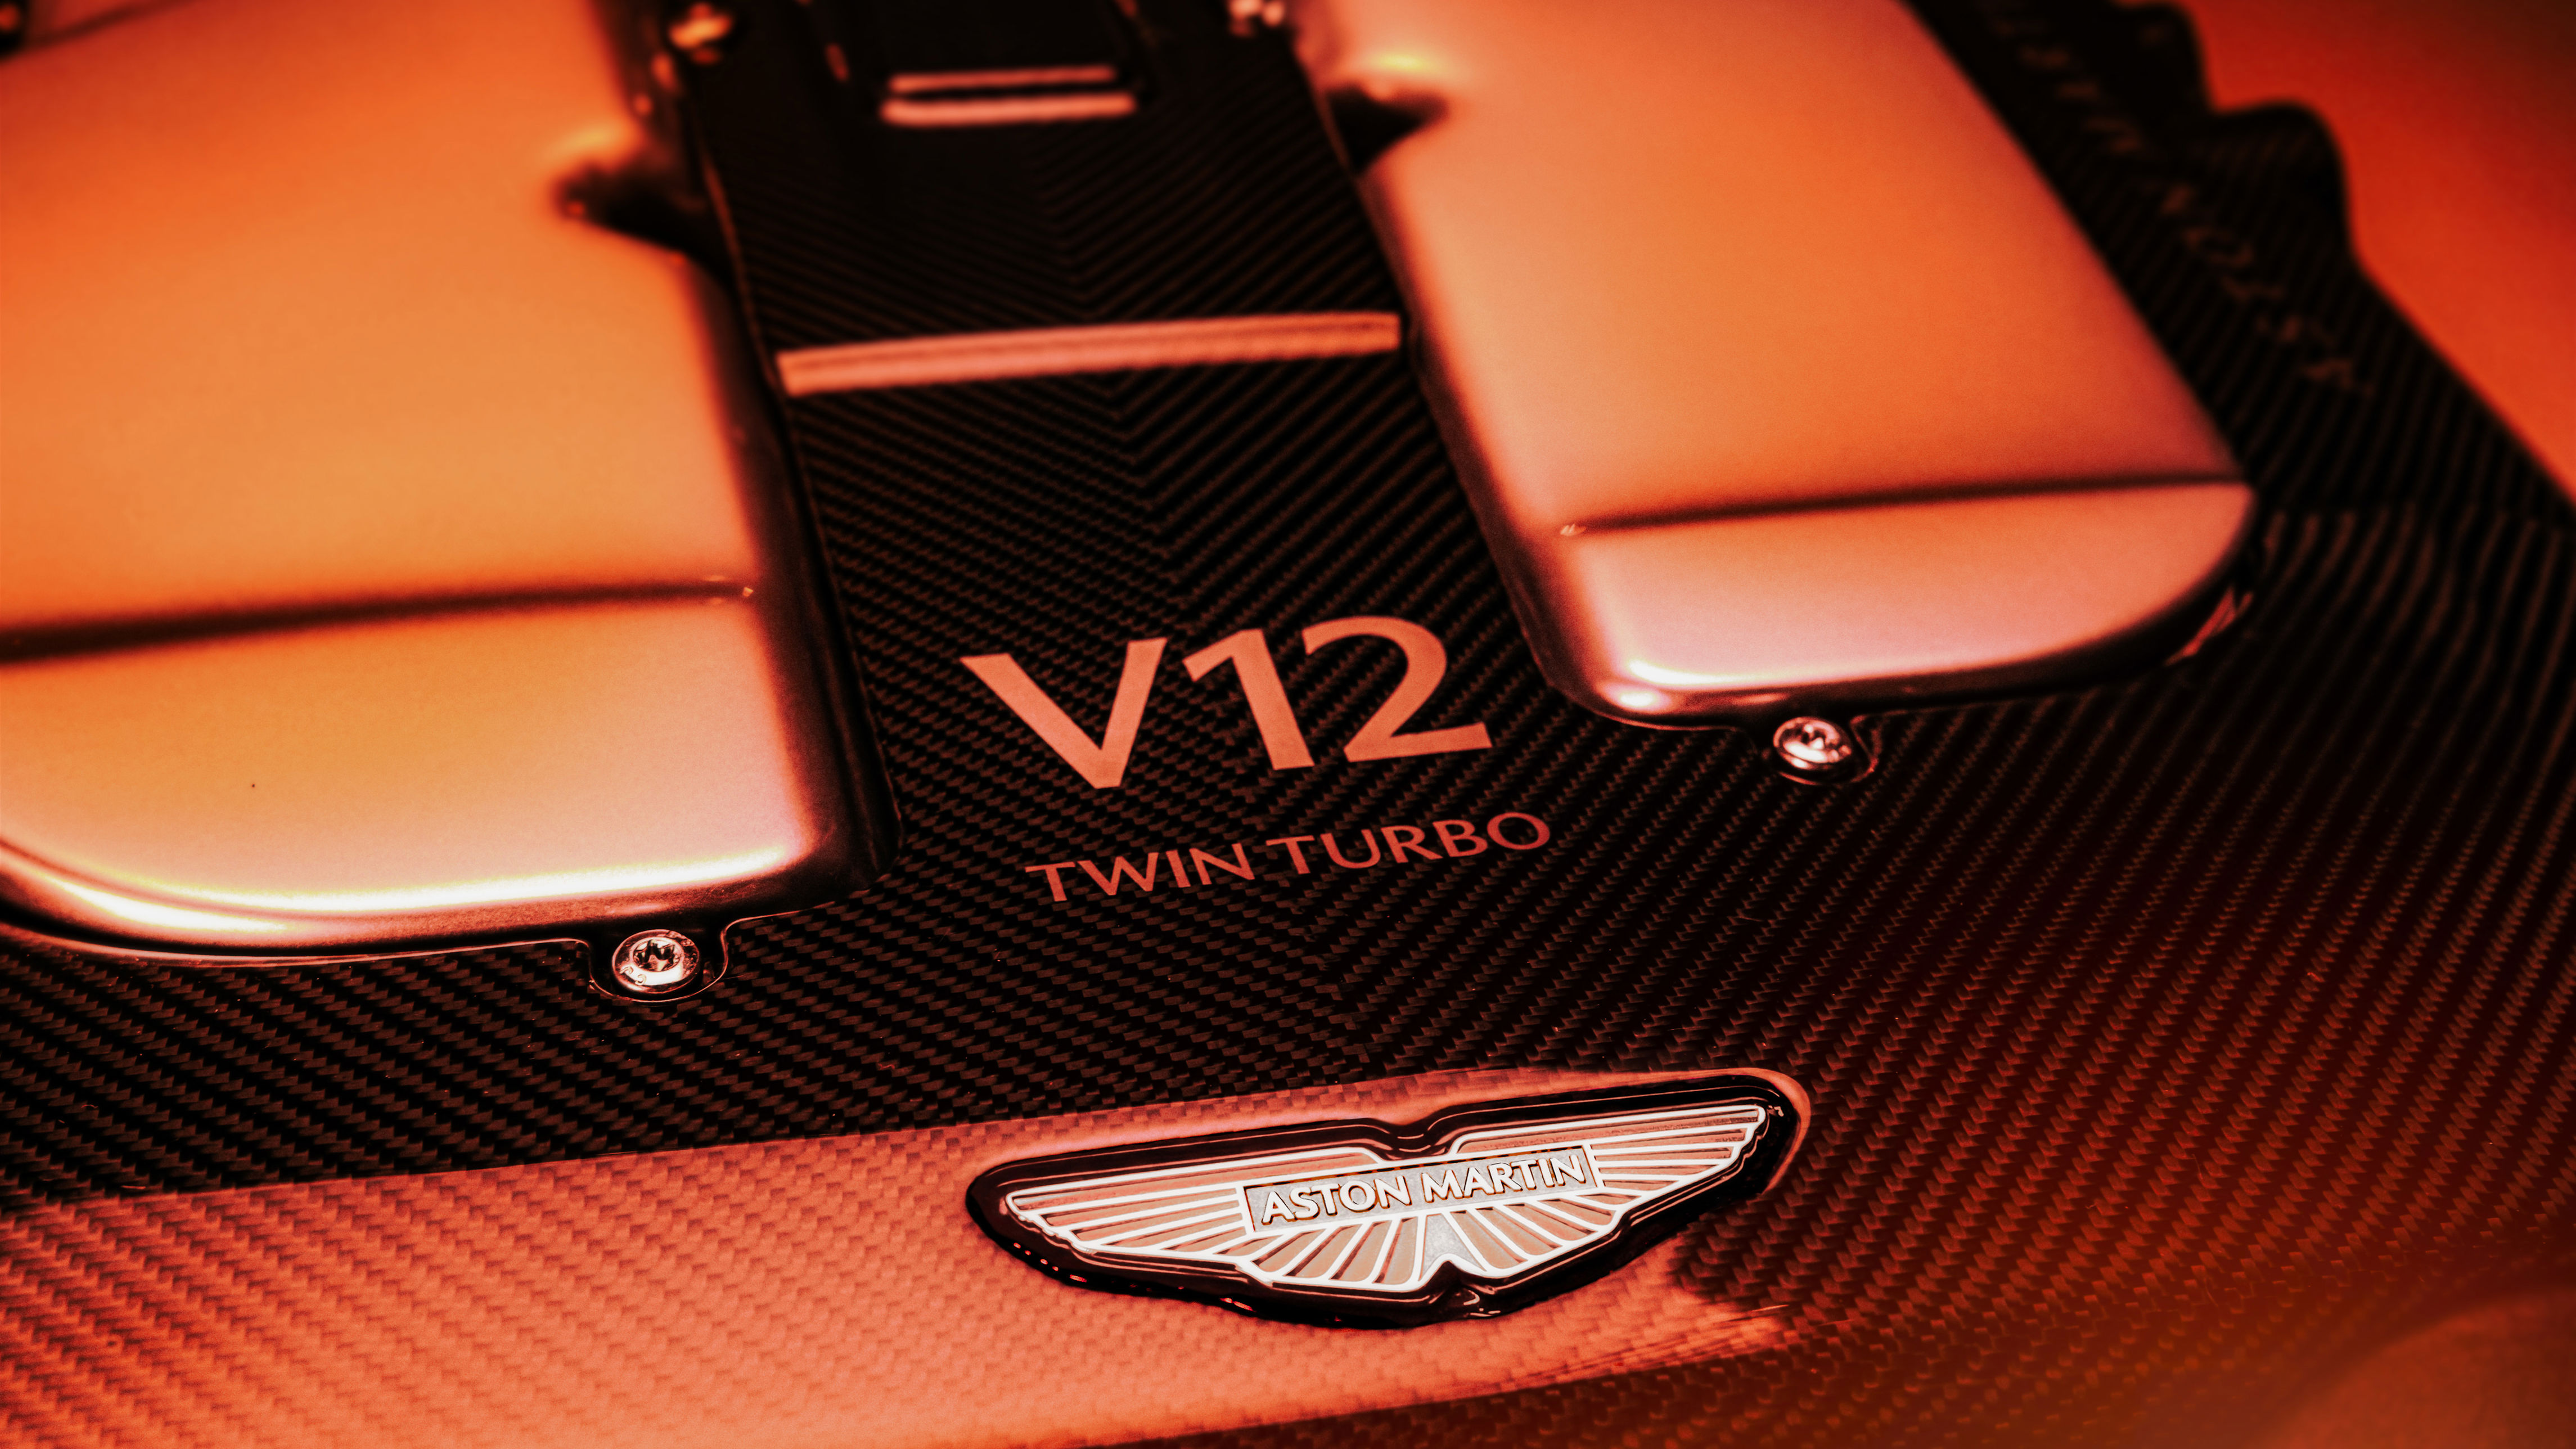 aston martin’s next turbo v12 will have 824bhp and sit in the new vanquish